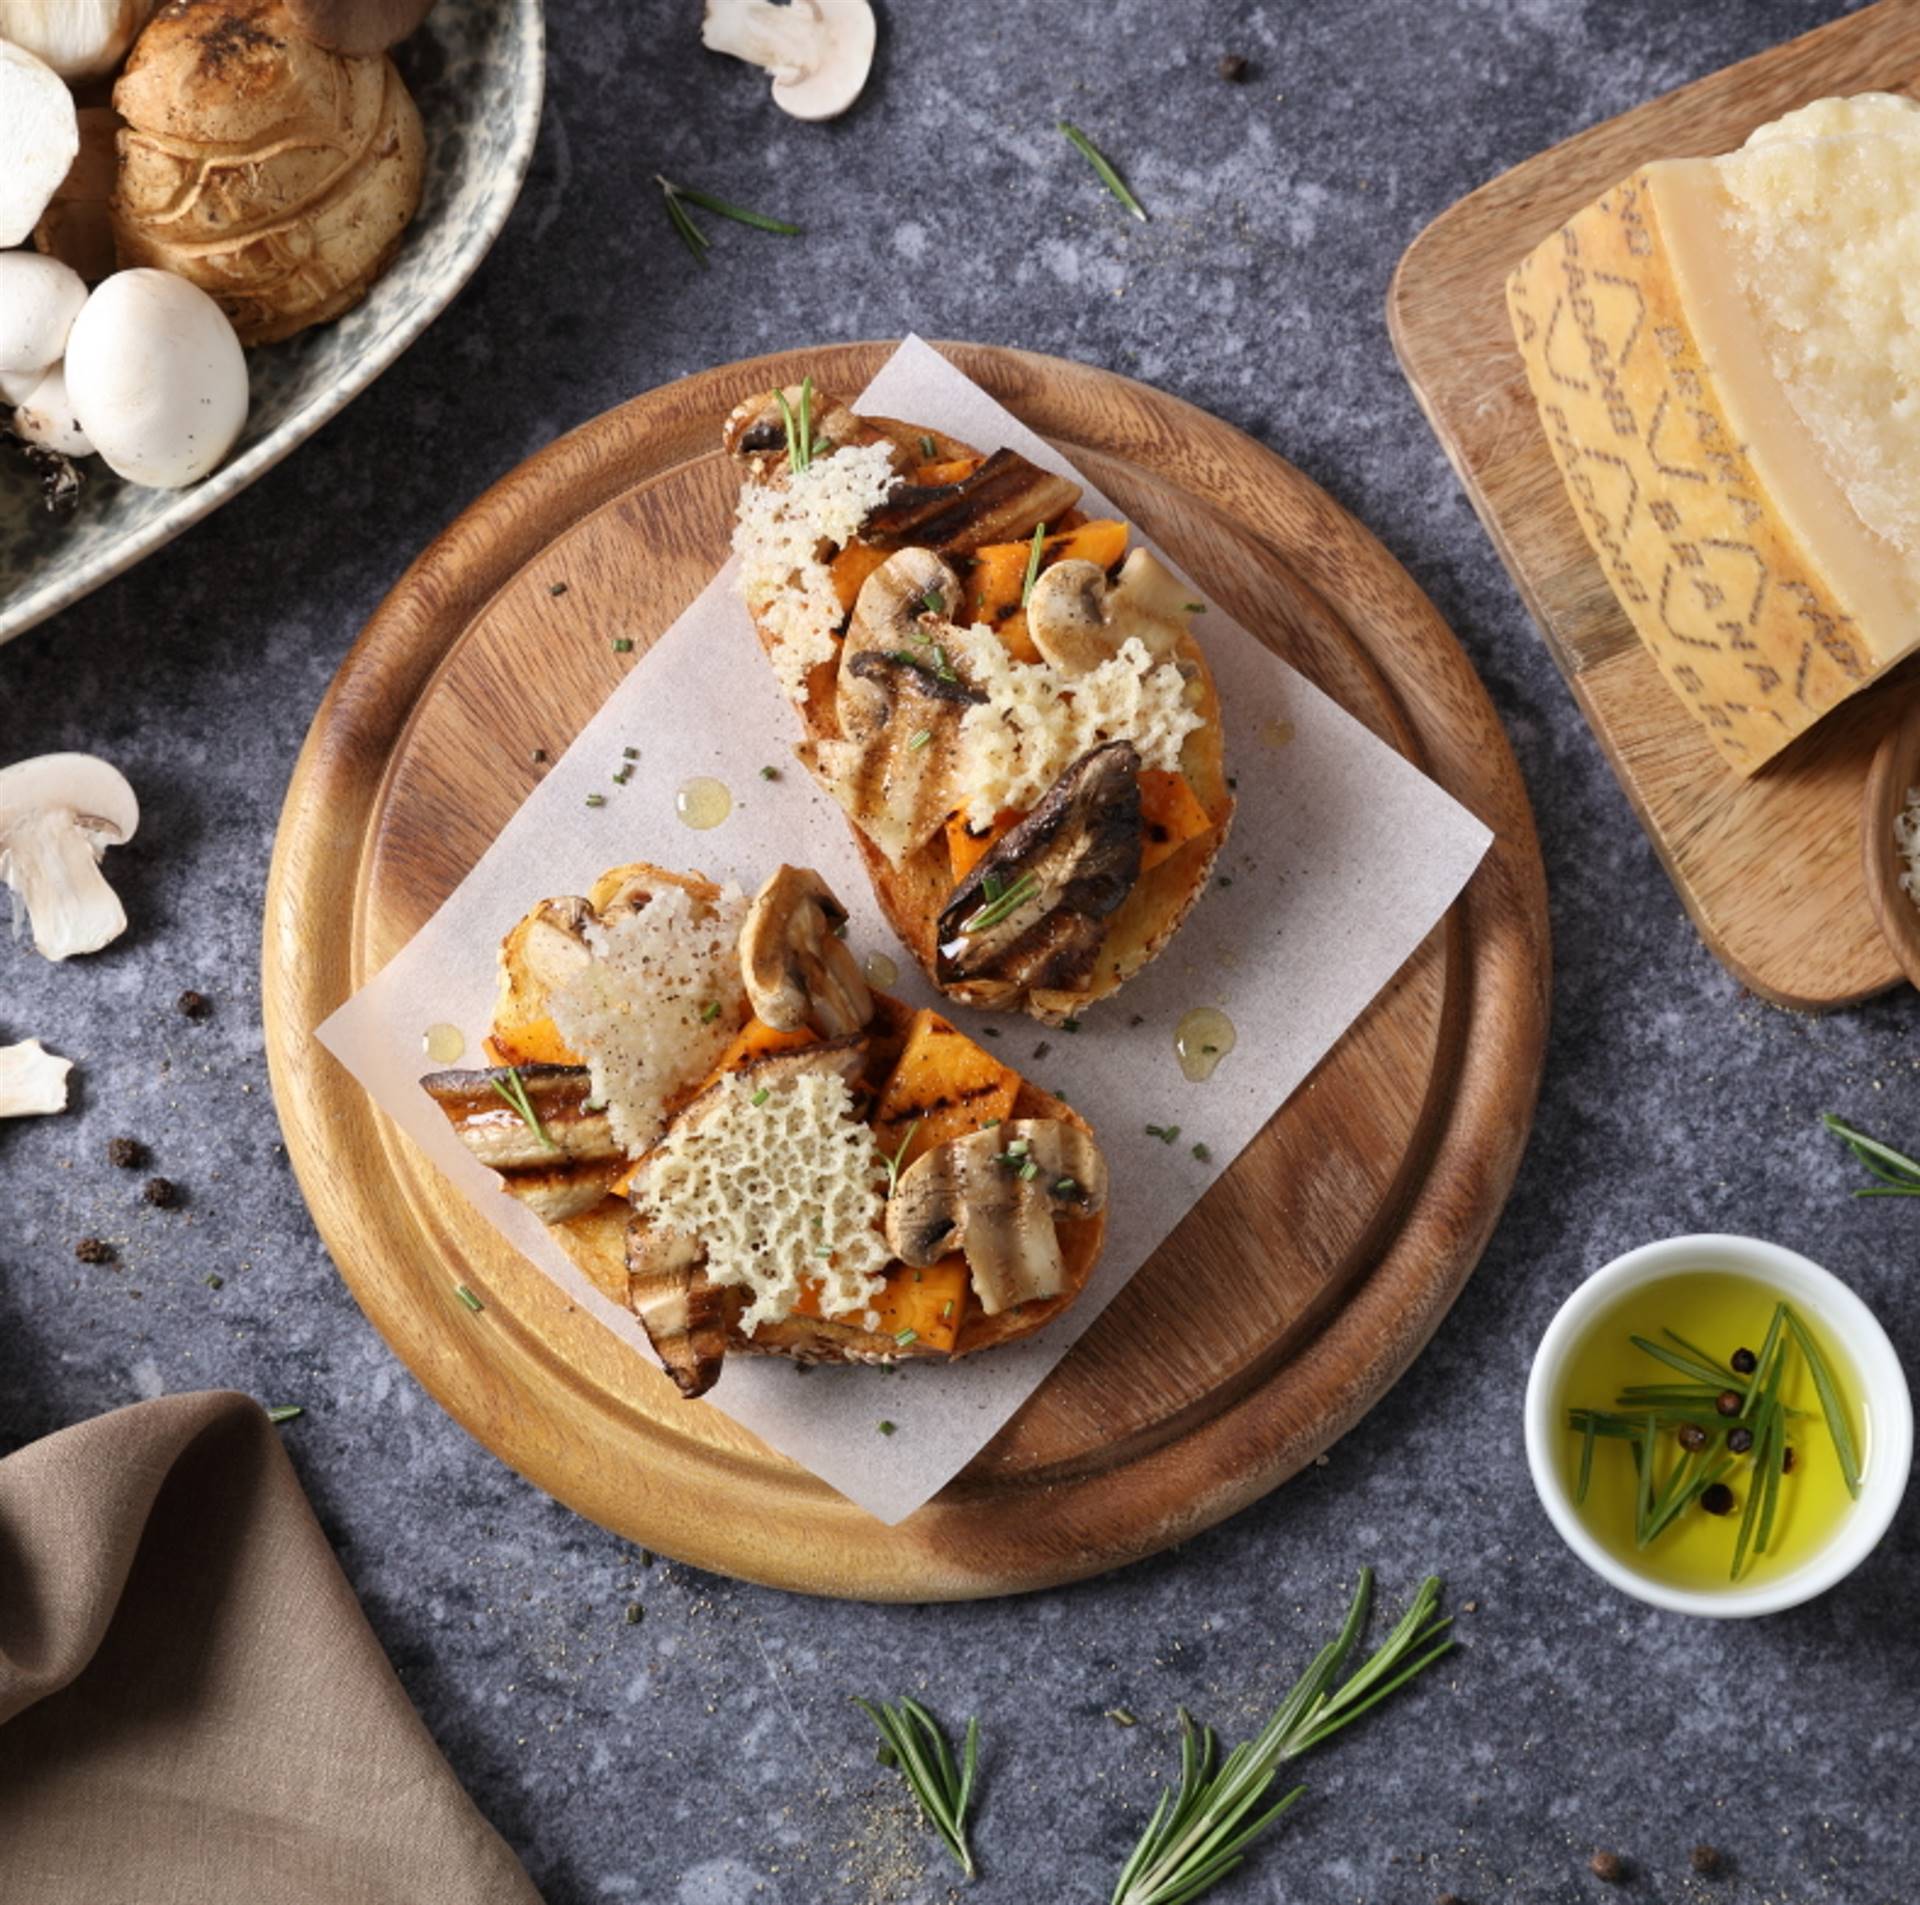 Bruschetta with pumpkin and grilled mushrooms, Grana Padano wafers and rosemary-flavoured oil